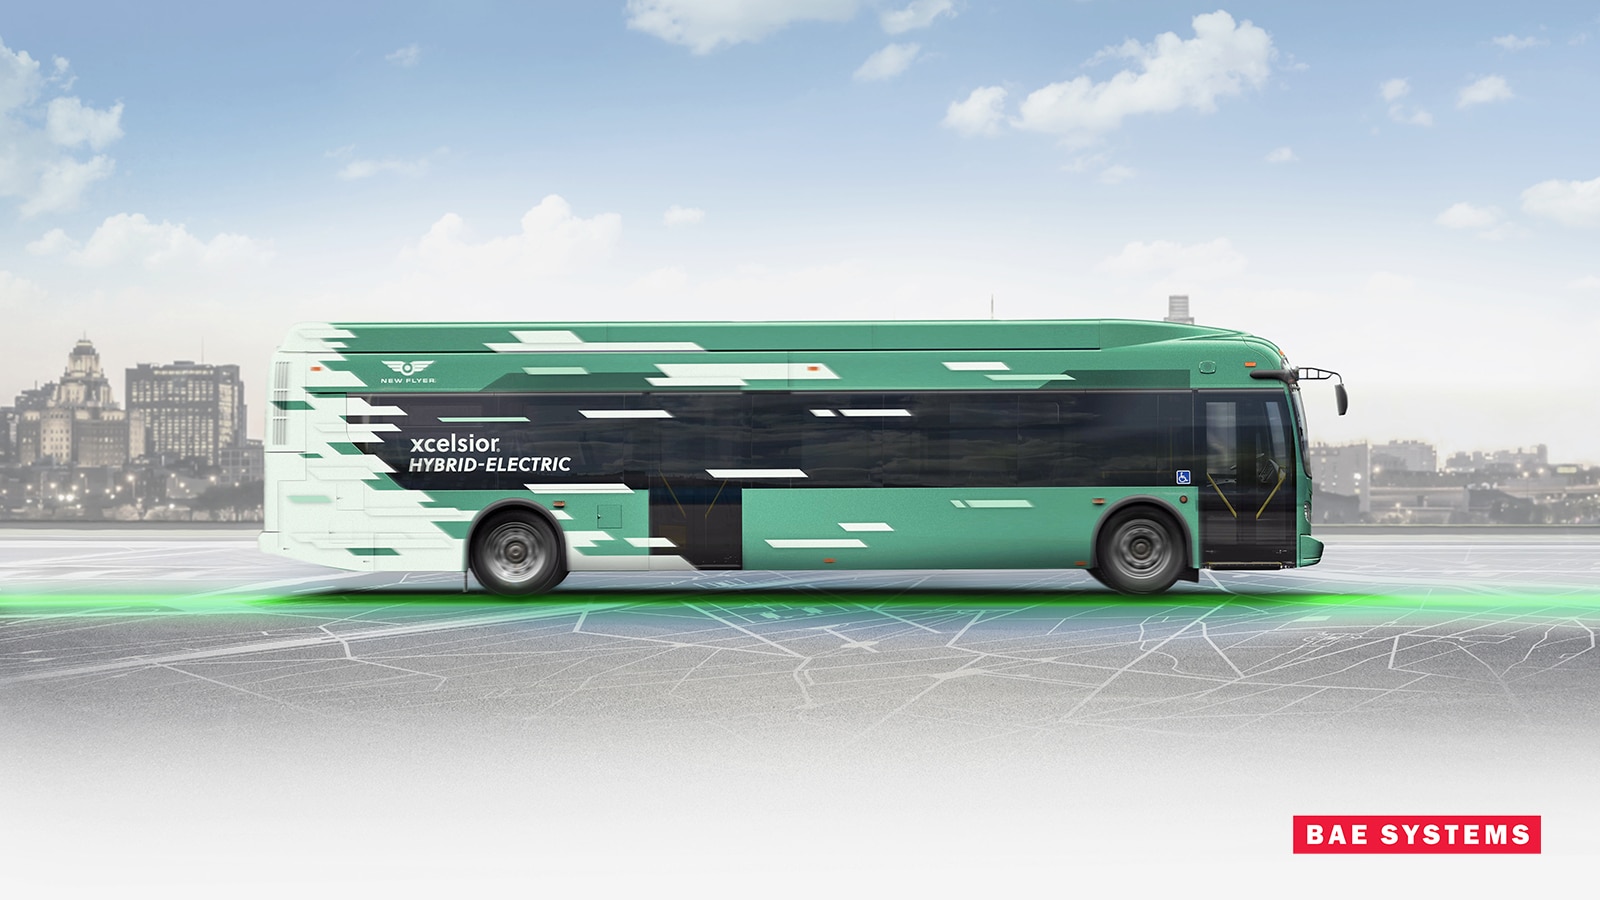 BAE Systems to Provide Electric Drive Systems for Philadelphia’s New Fleet of Zero-Emission Capable Hybrid Buses